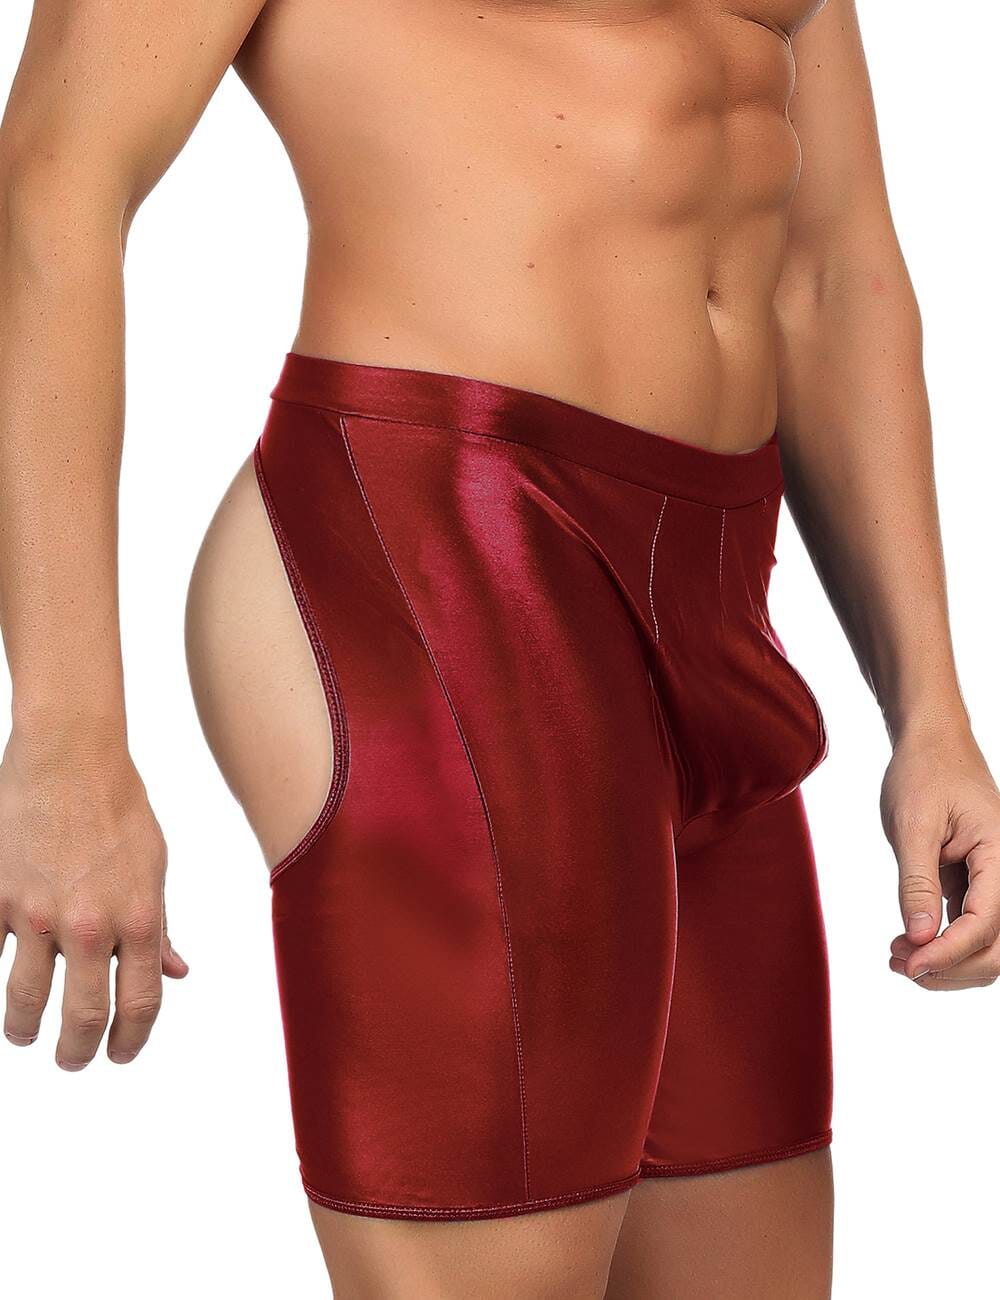 Men's Leather Assless Pants with Exposed Hips - Stand out in Wet Look Shorts Menswear Scandals Lingerie 